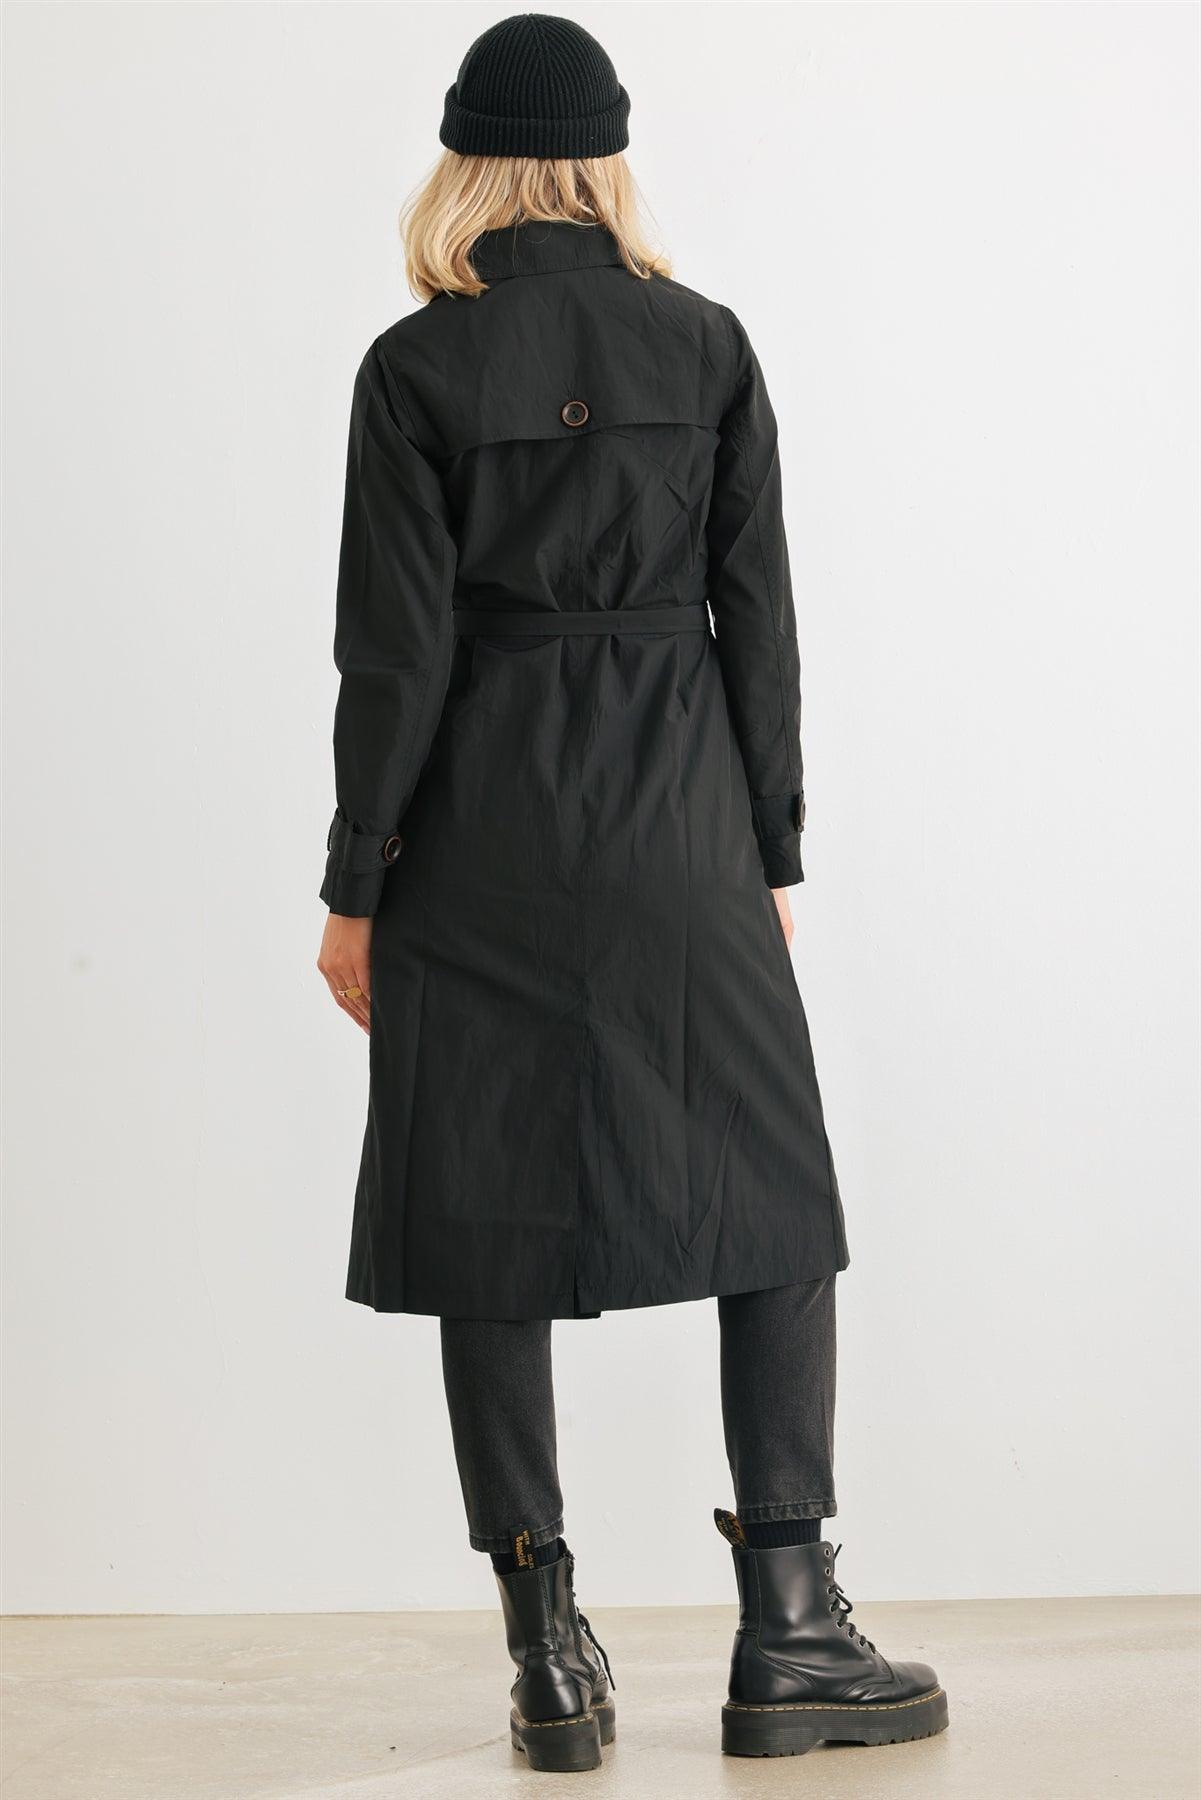 Black Double-Breasted Two Pocket Belted Collared Neck Trench Coat